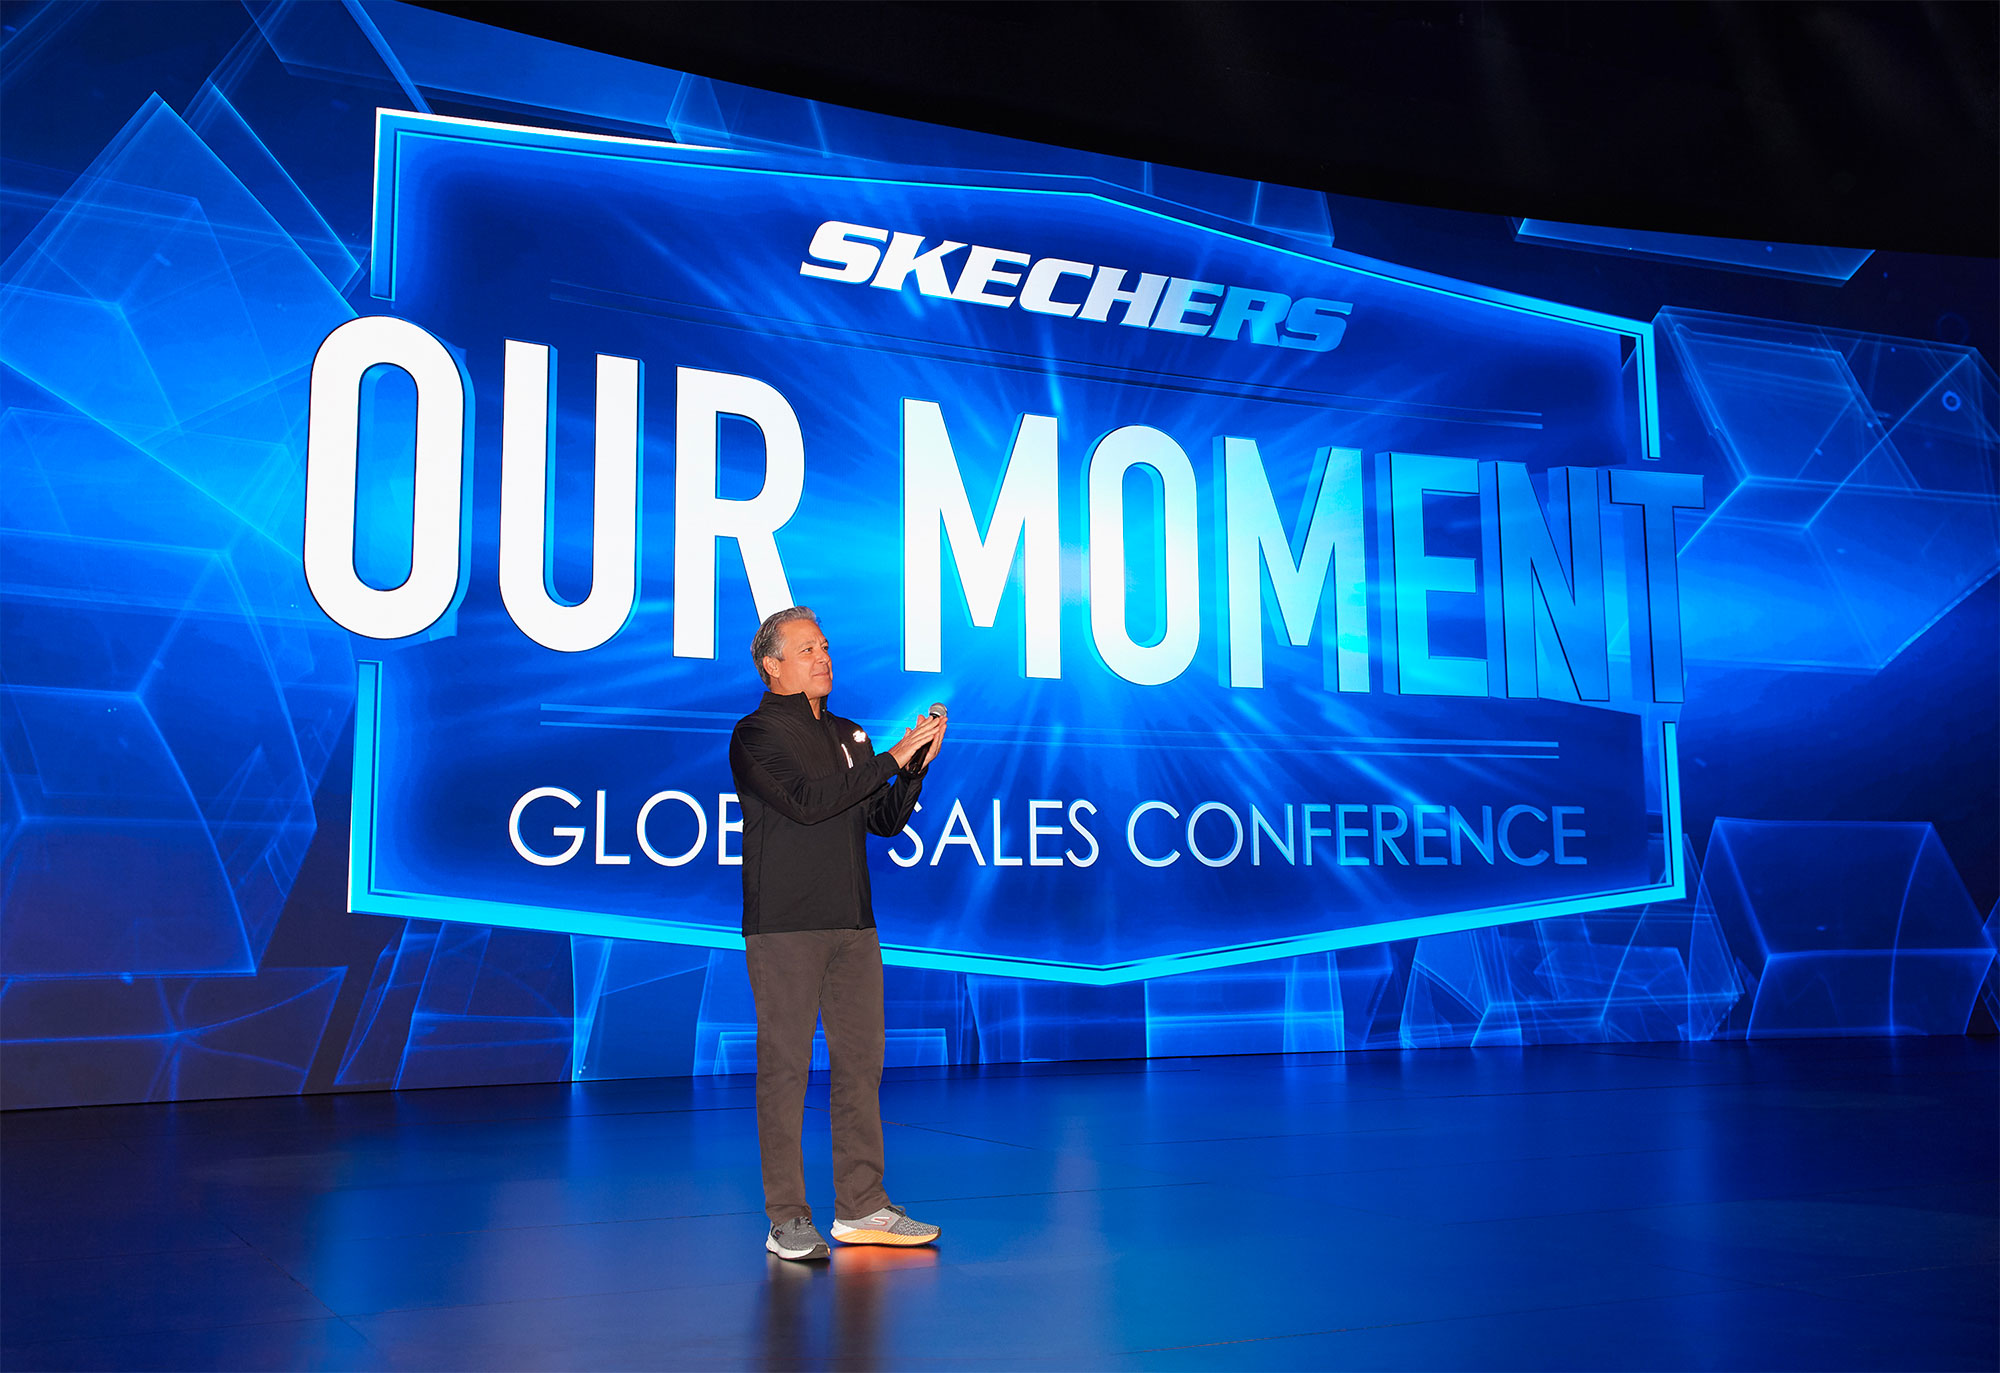 about skechers